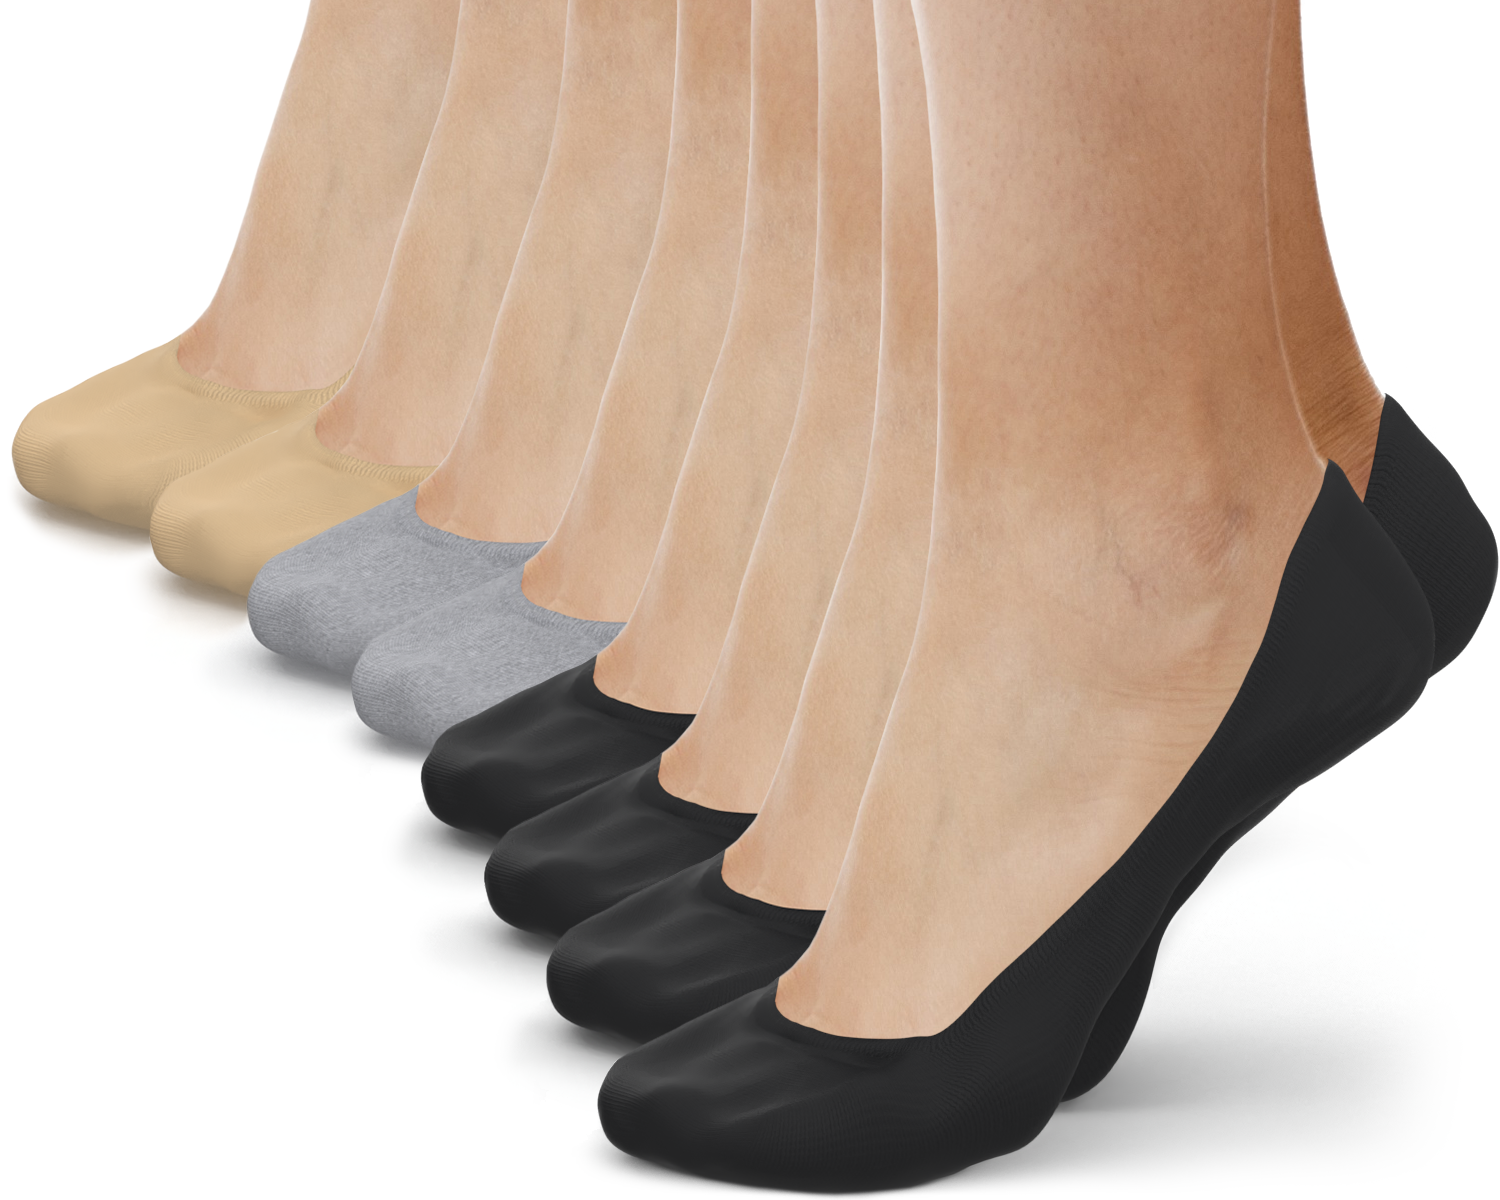 No Show Socks - Comfortable and Discreet Footwear for Everyday Wear - Assorted (8 Pairs) Color - One Size Fits All Size